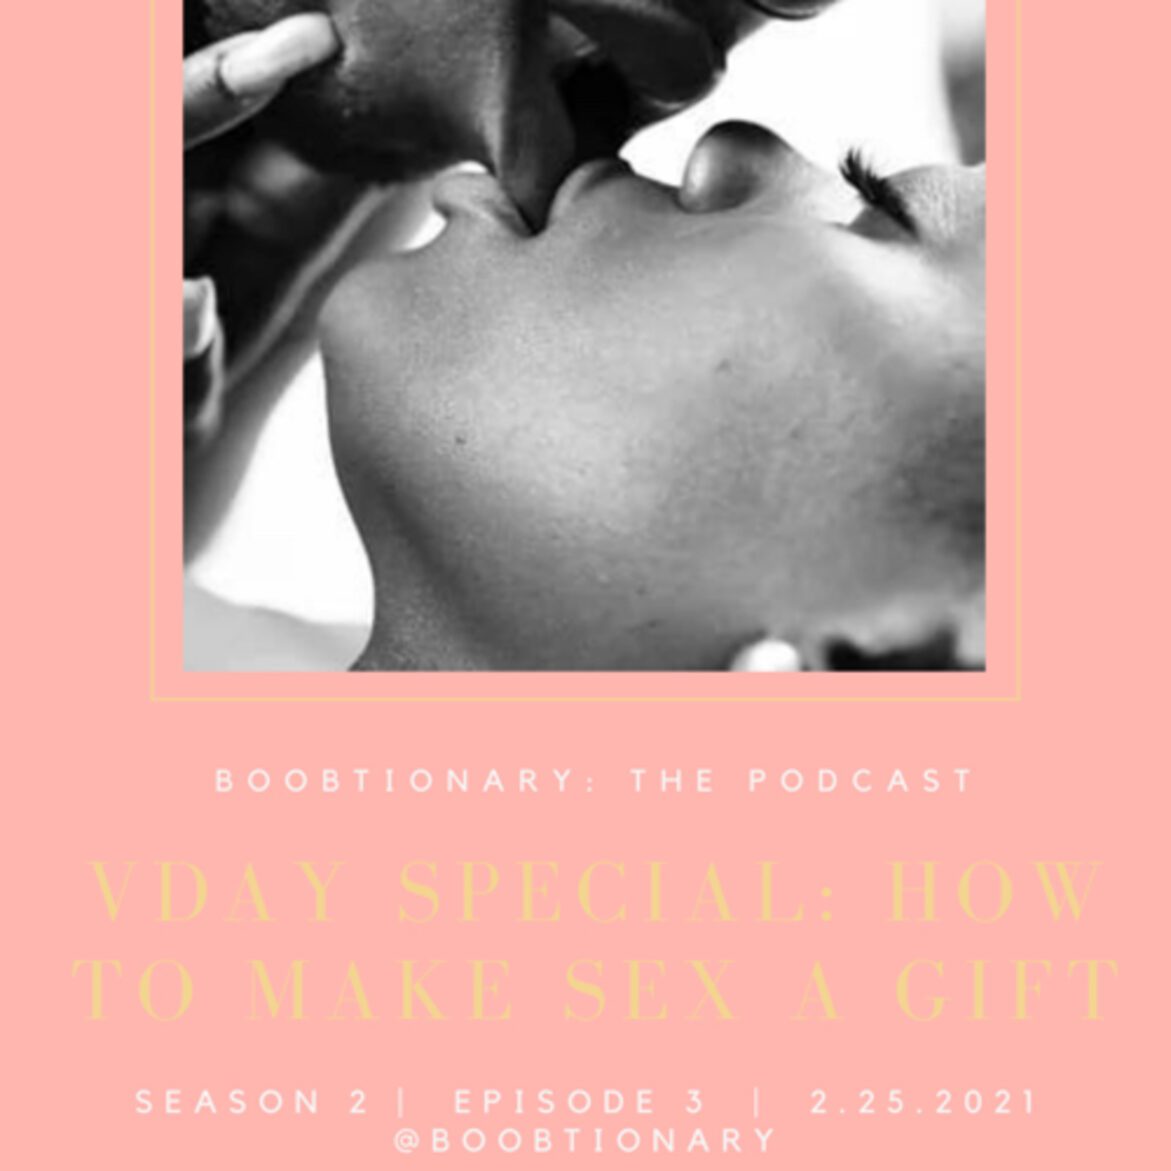 Black Podcasting - VDay Special: How To Make Sex a Gift